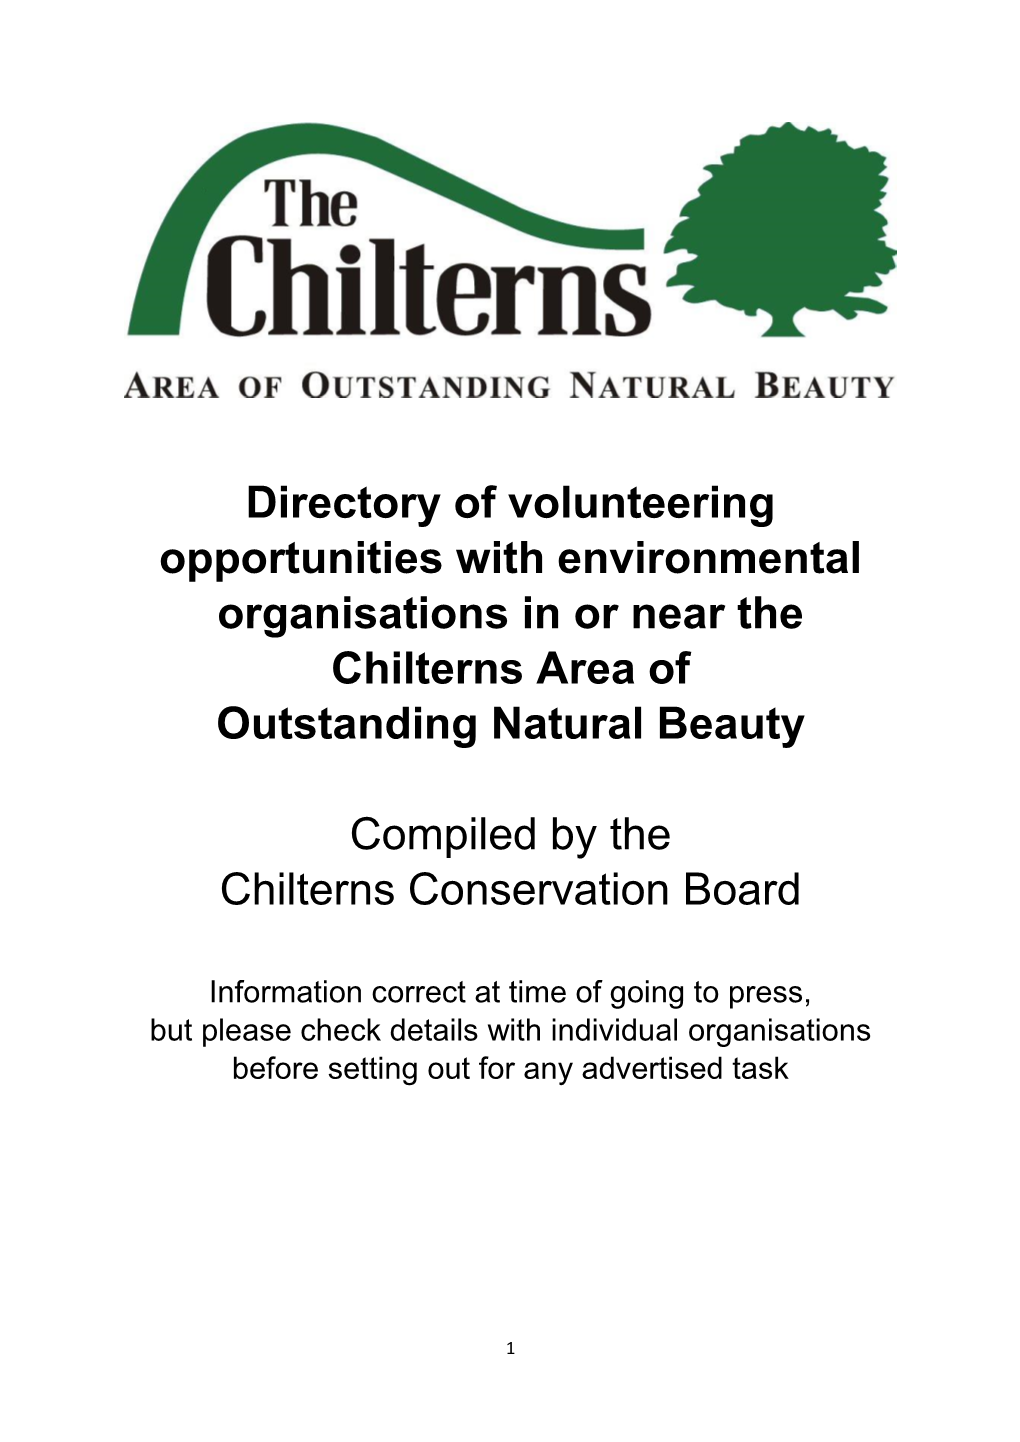 Directory of Volunteering Opportunities with Environmental Organisations in Or Near the Chilterns Area of Outstanding Natural Beauty